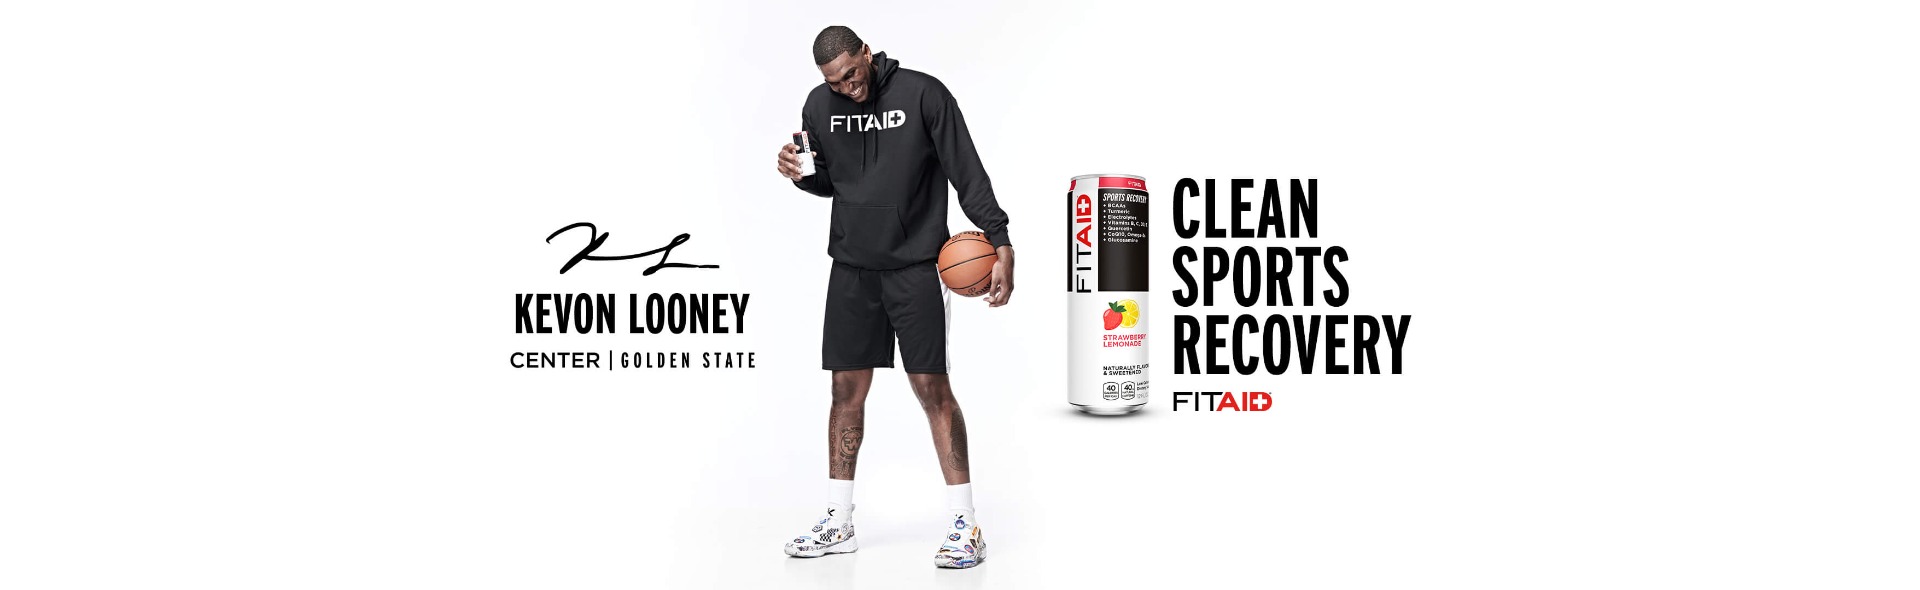 KEVON LOONEY CENTER | GOLDEN STATE | CLEAN SPORTS REOCVERY FITAID